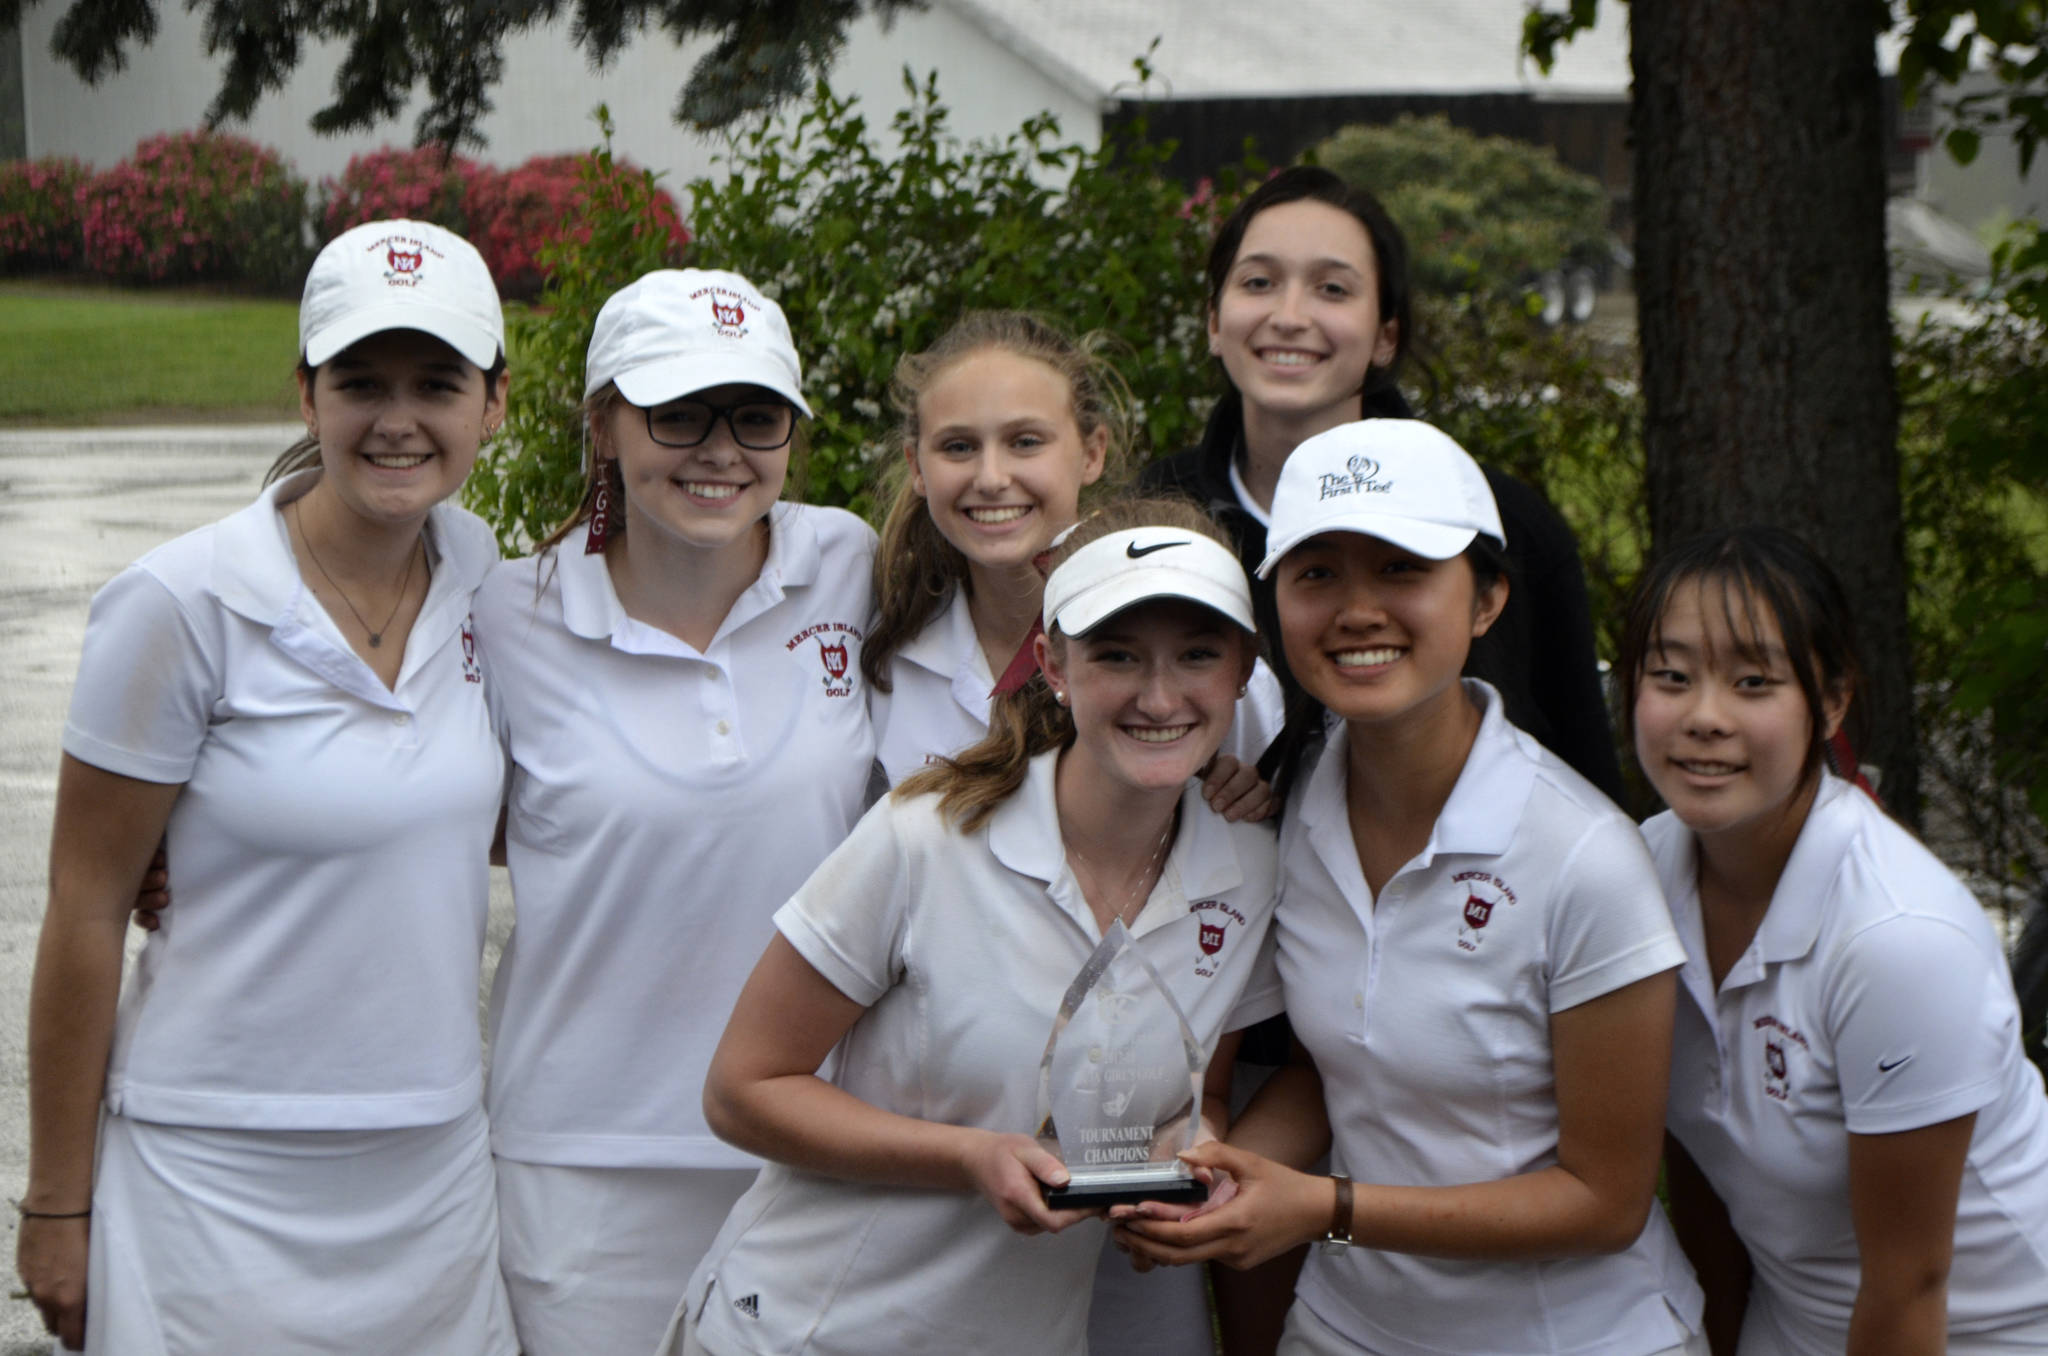 Photo courtesy of Billy Pruchno                                The Mercer Island Islanders girls golf team captured first place at the KingCo golf tournament on May 8 at Snohomish Golf Course.                                It was the fourth consecutive year the Islanders have won the coveted tournament. Islanders’ freshman Gihoe Seo finished in second place overall at the tourney. Seo, senior Estey Chen, sophomore Lilly Pruchno and senior Ella Warburg will compete in the 3A Sea-King district golf tournament. Annelise Rorem and Katelyn Travis will be alternates at districts.                                “I couldn’t be prouder of this team. All season long these girls never stopped competing against every top team in the state. To claim this victory is remarkable considering just how tough KingCo is this year. I think it is a testament to the strong senior leadership, terrific can-do attitude by our juniors and the incredible work ethic of our underclassmen,” Mercer Island head coach Dan Papasedero said.